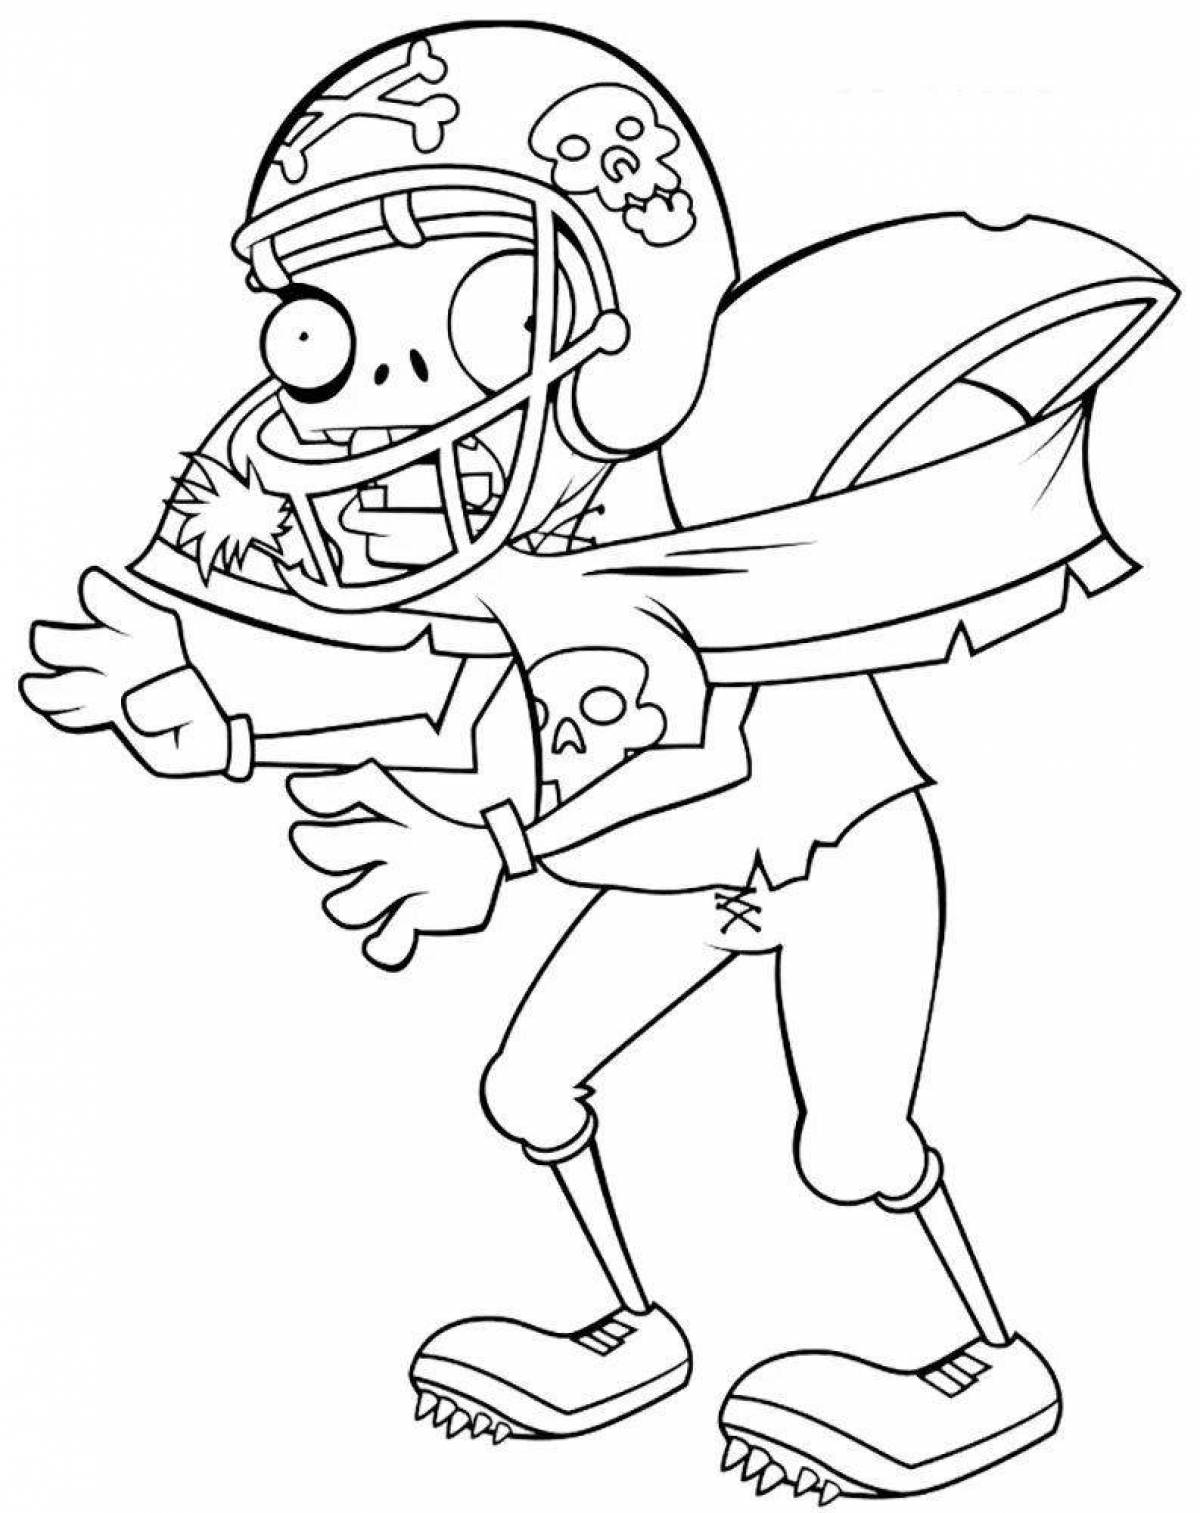 Glowing plants vs zombies coloring pages